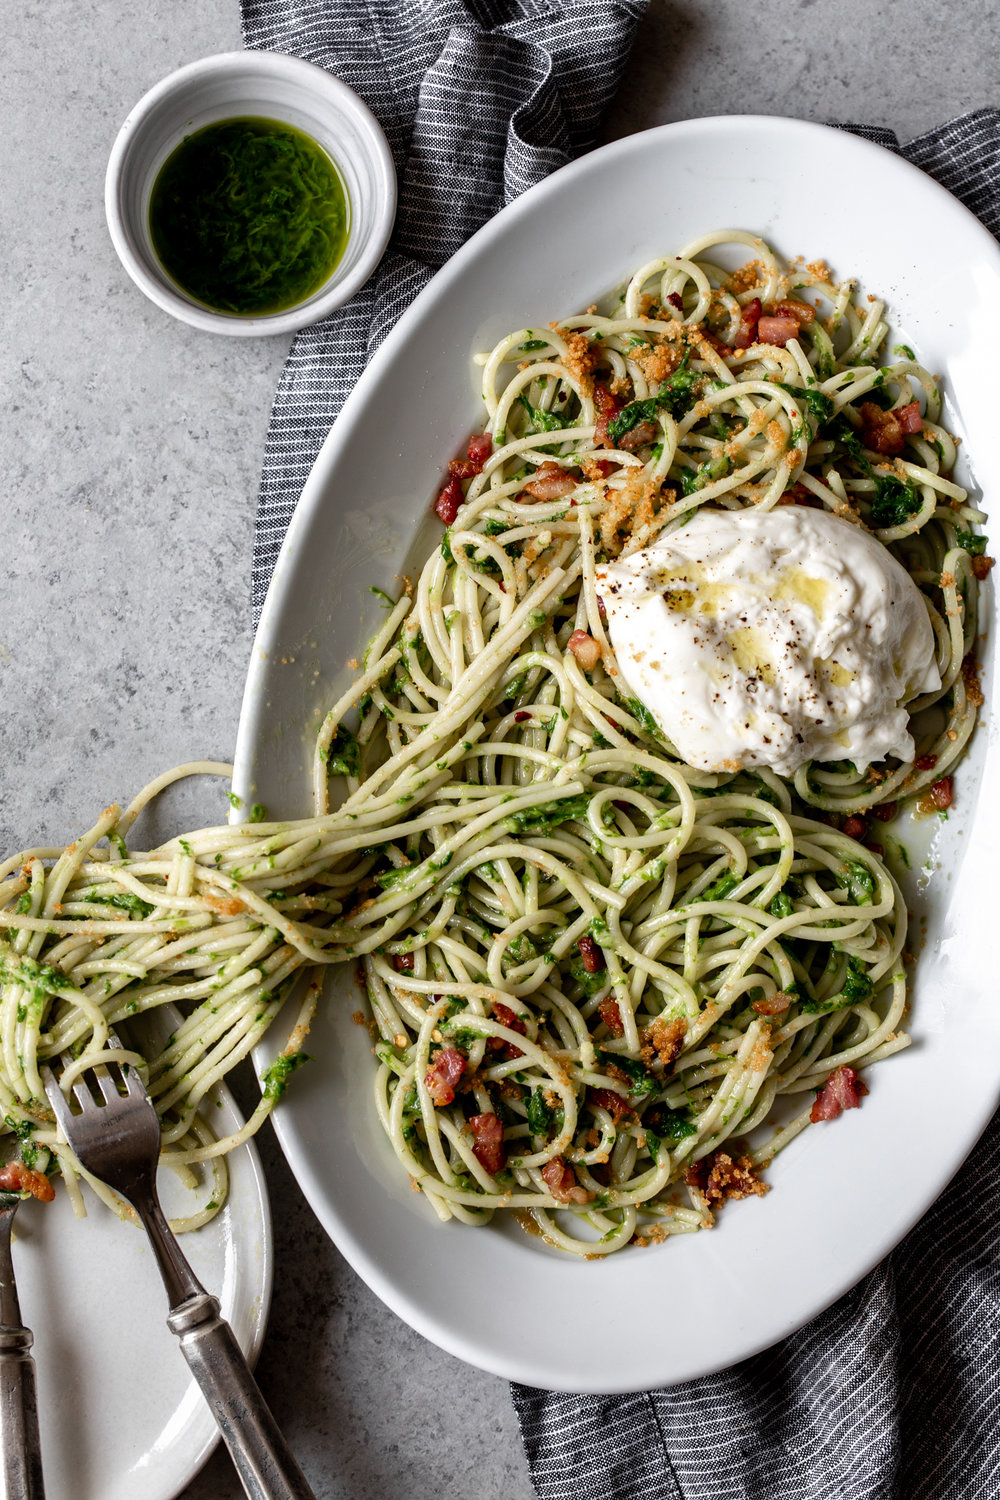 Ramp Pesto Spaghetti with Burrata recipe from cooking with cocktail rings